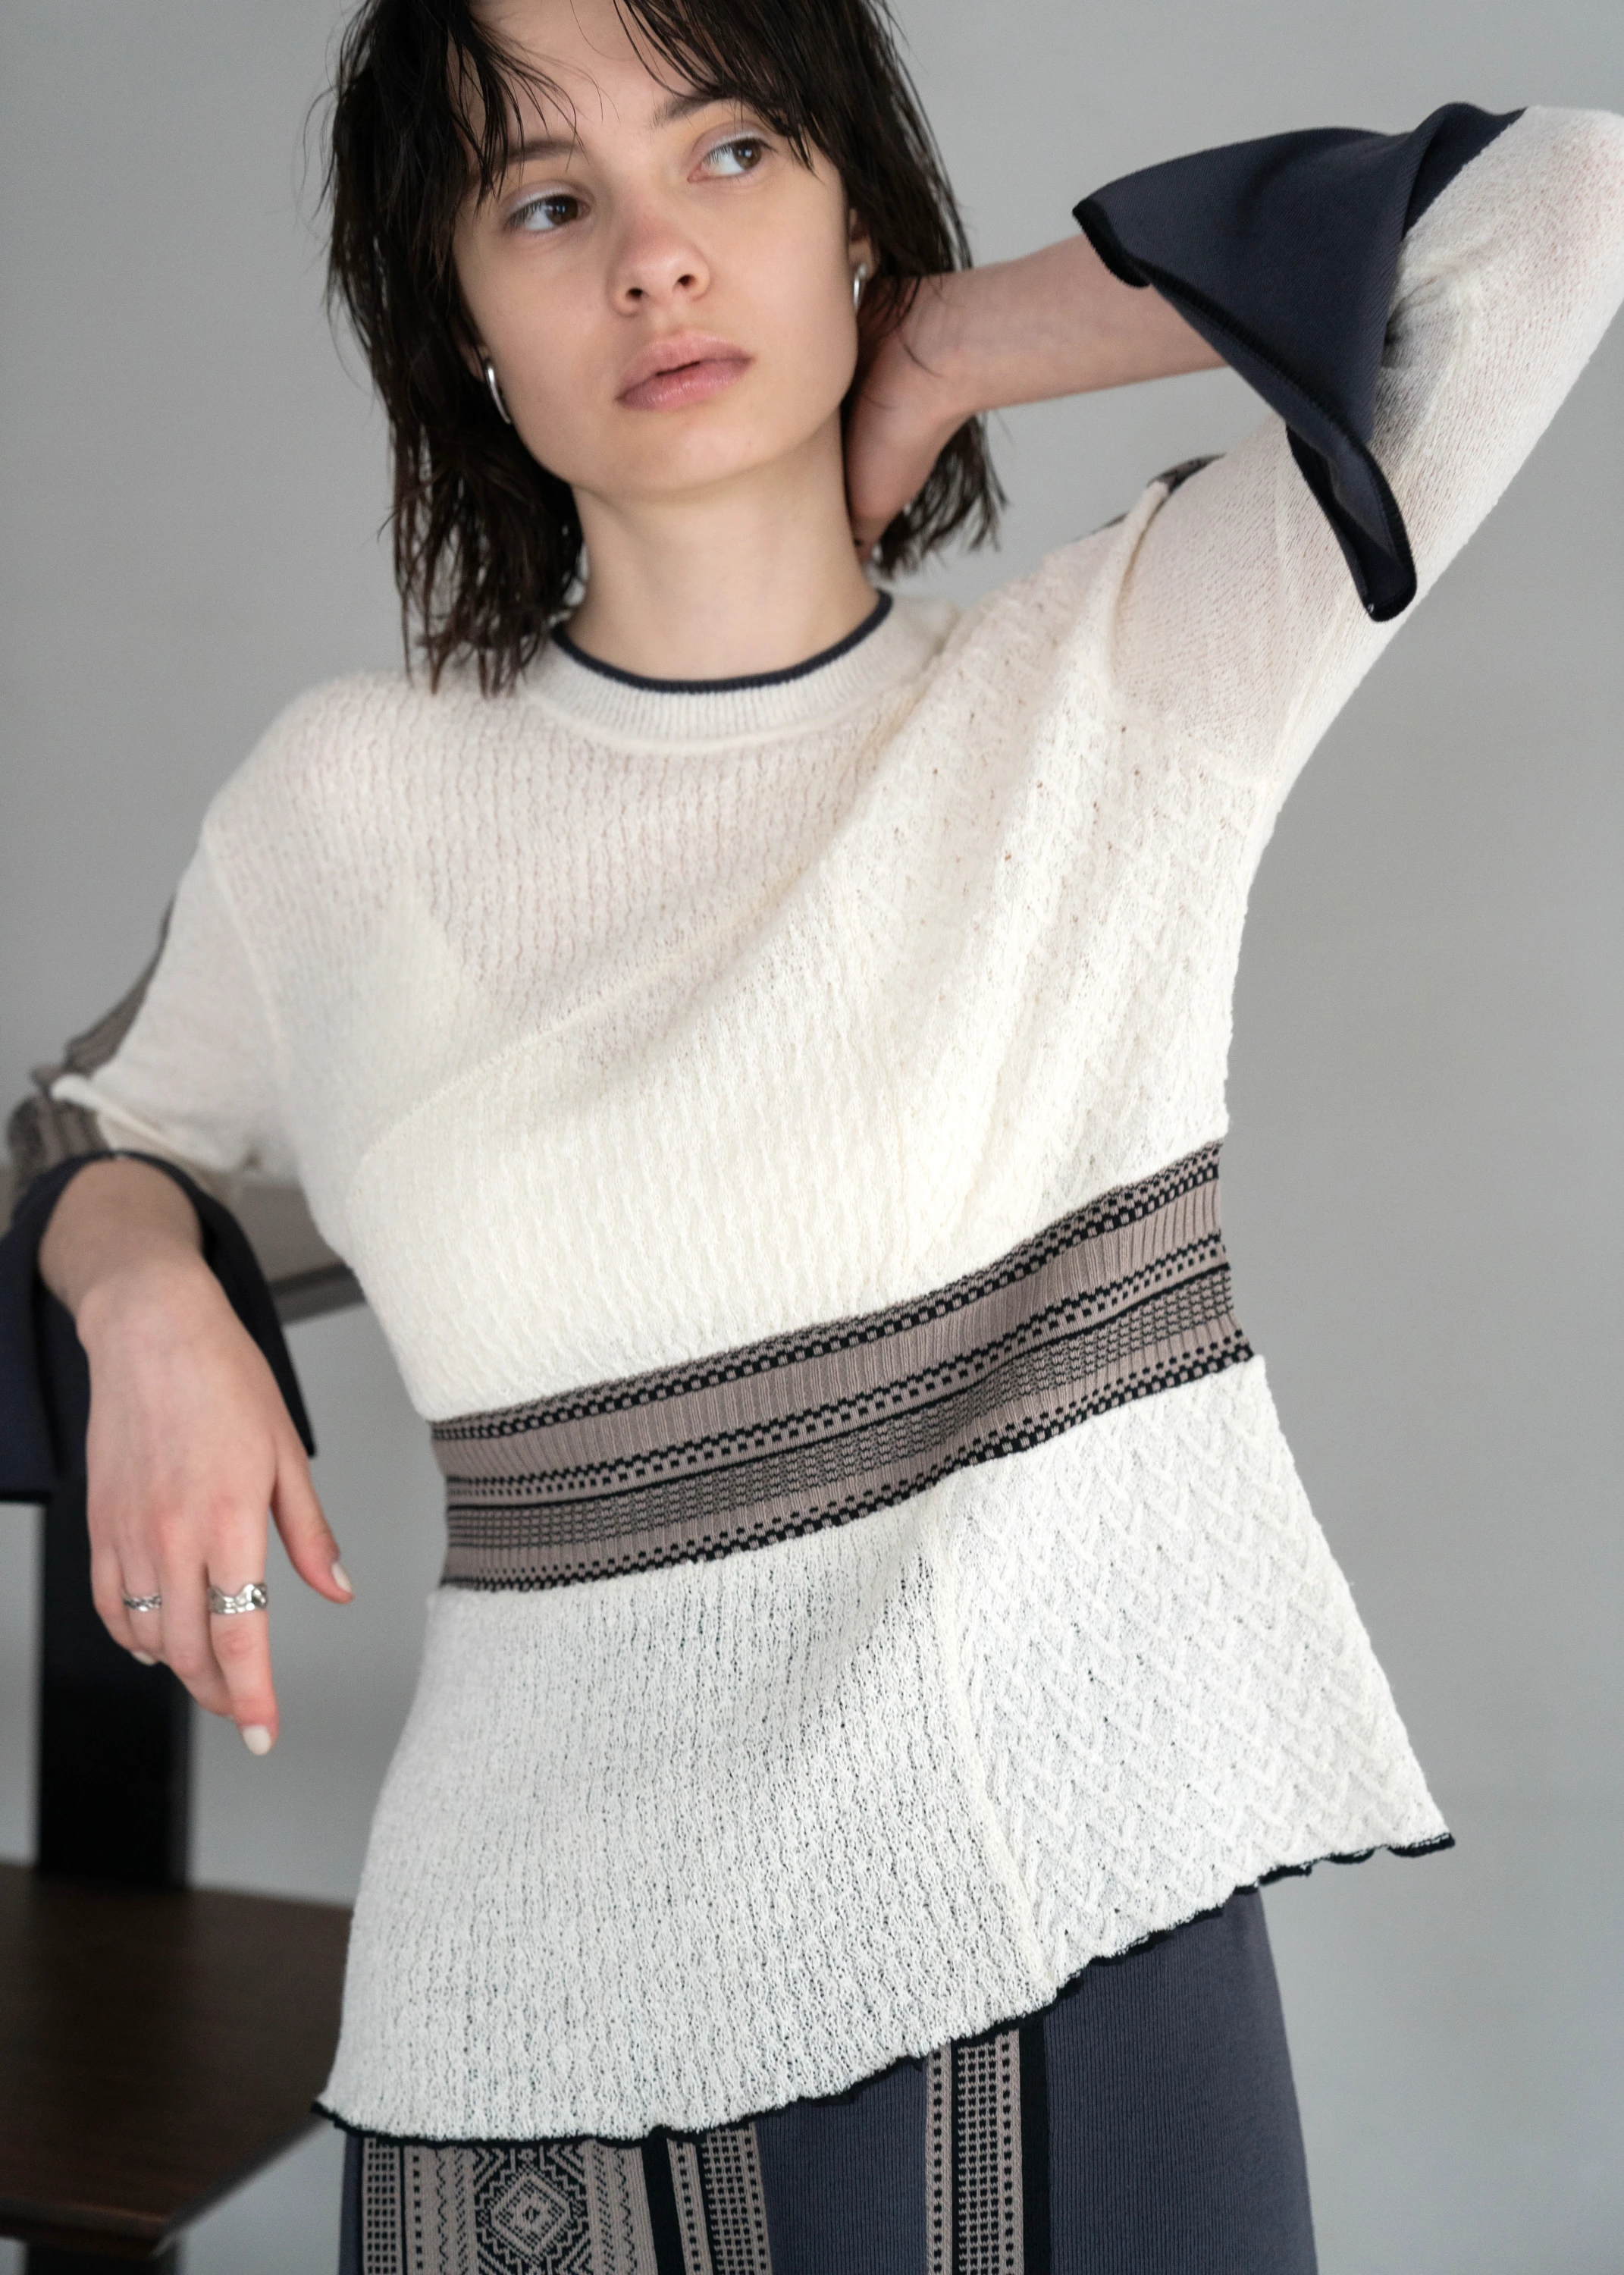 weave placement knit セットアップwillfully